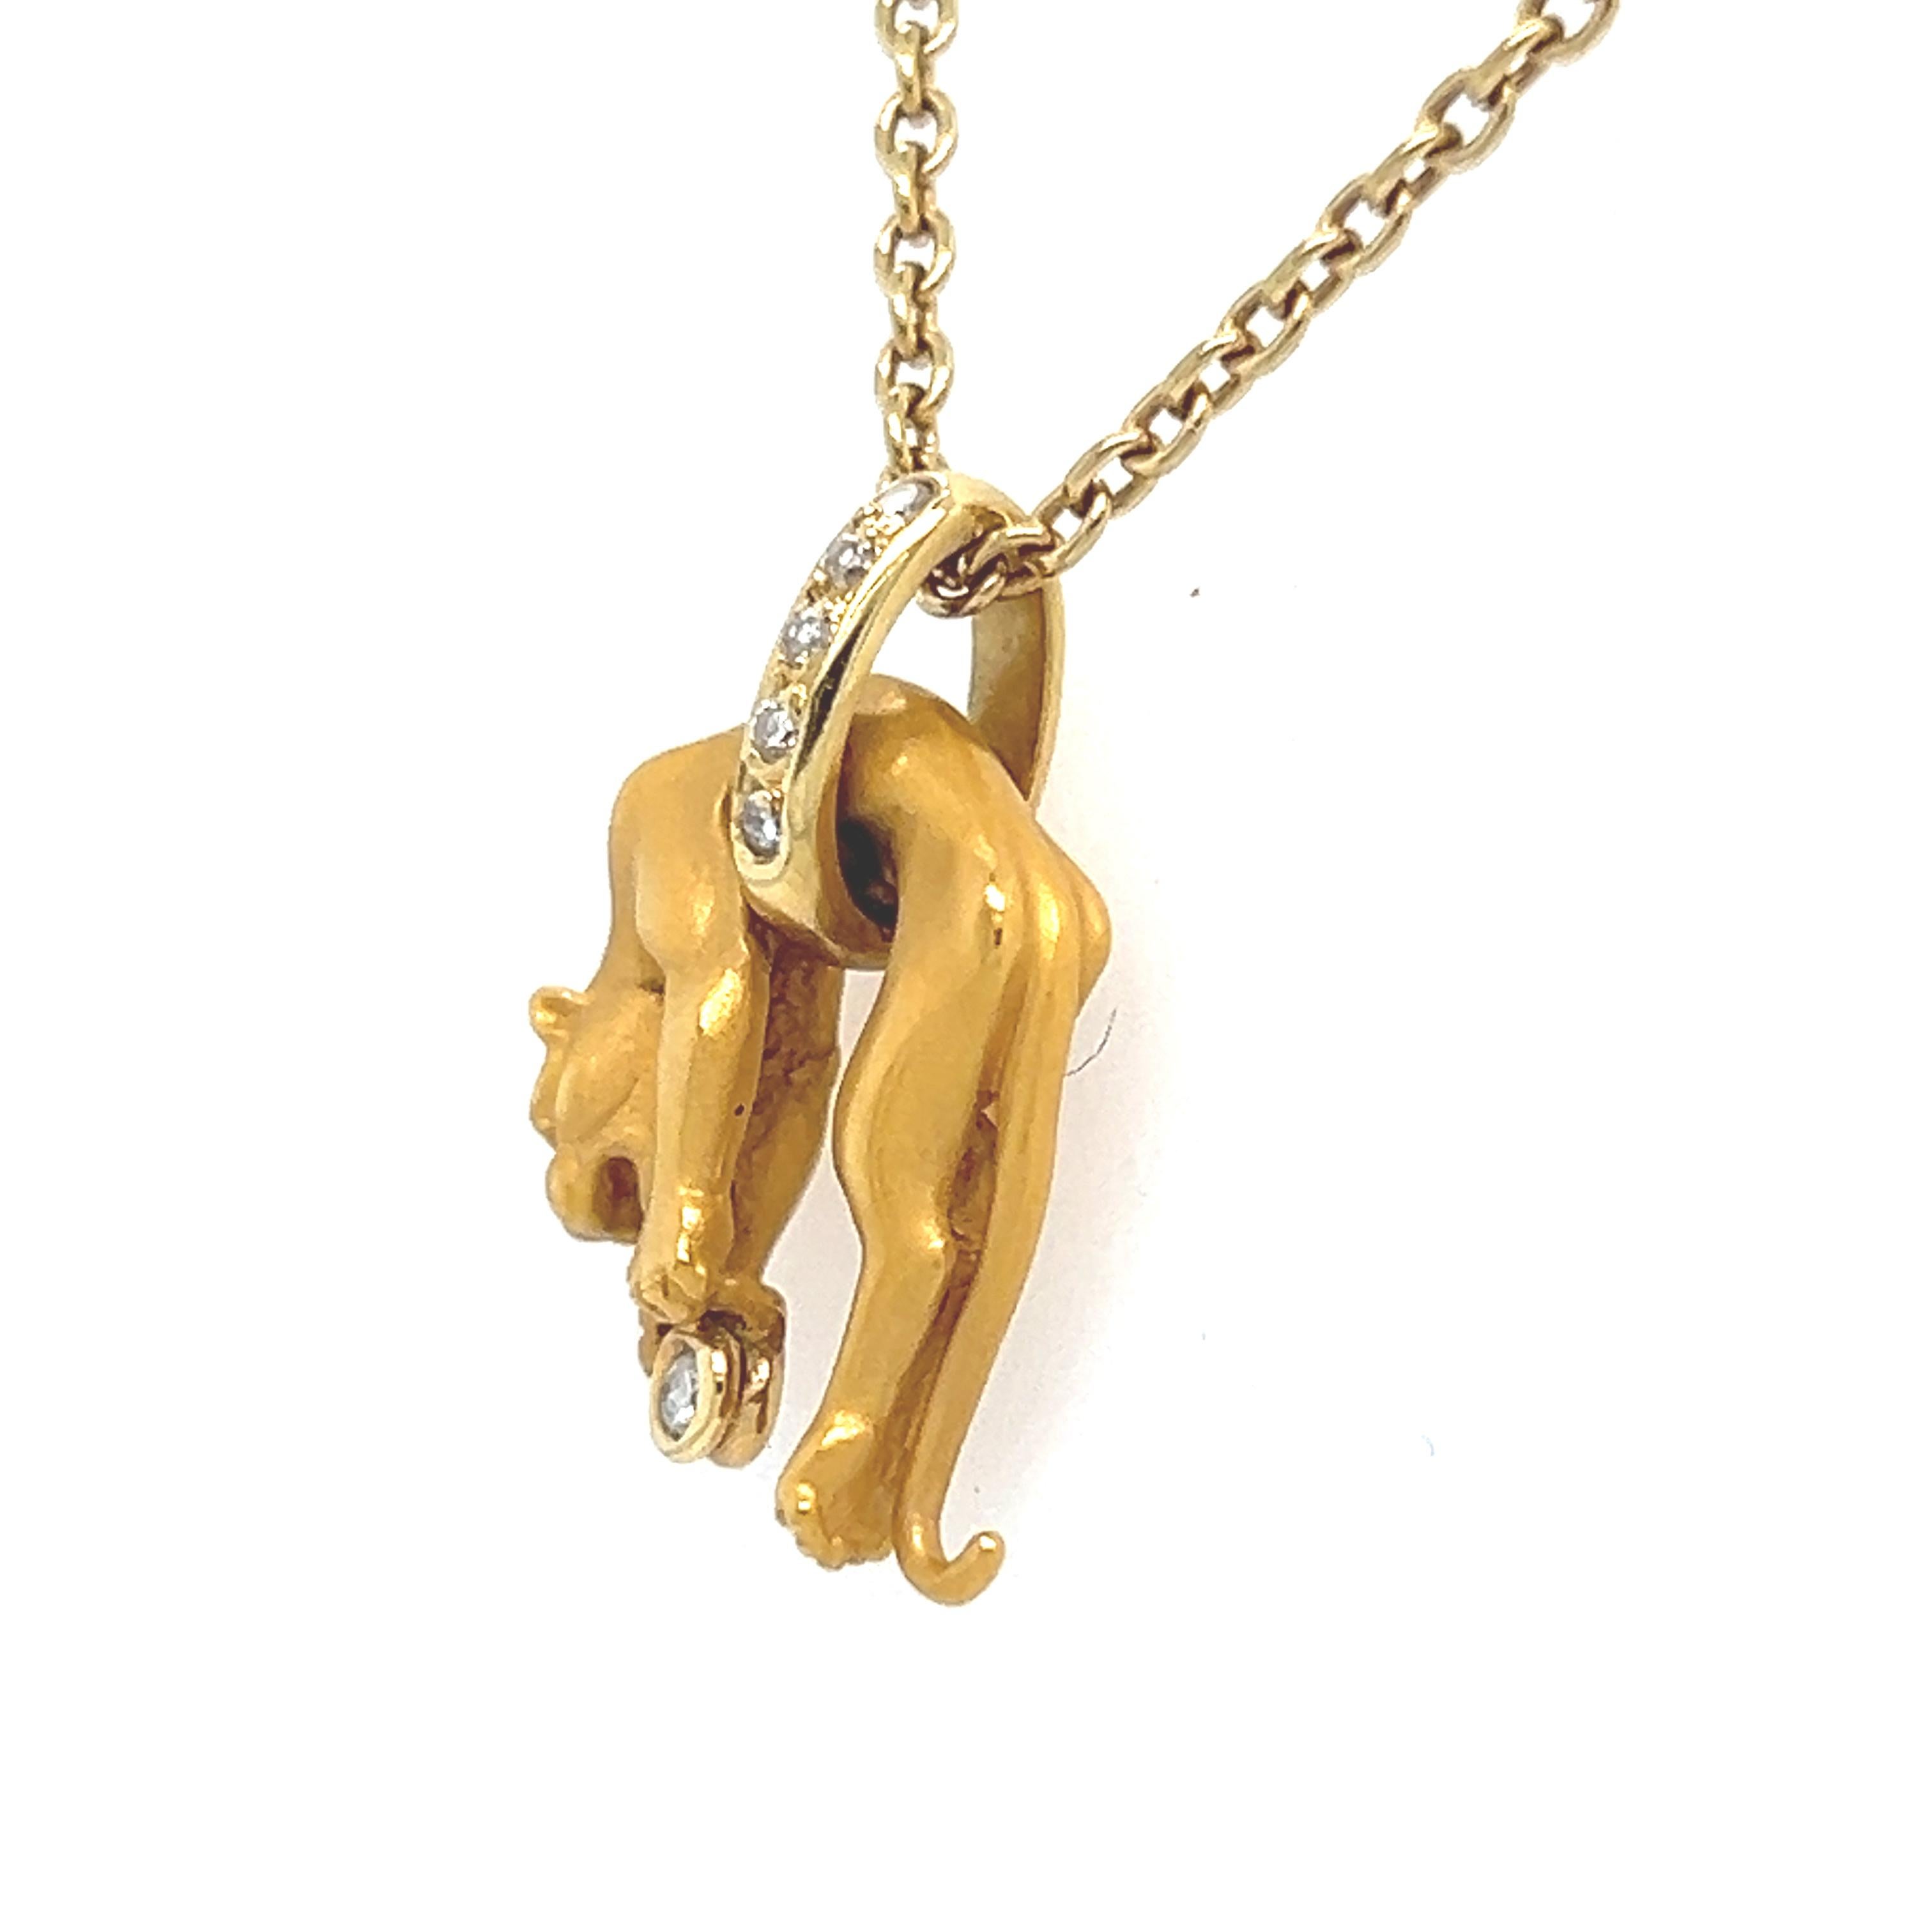 Modern Vintage 18K Yellow Gold Carrera y Carrera Panther Pendant with Diamonds. 